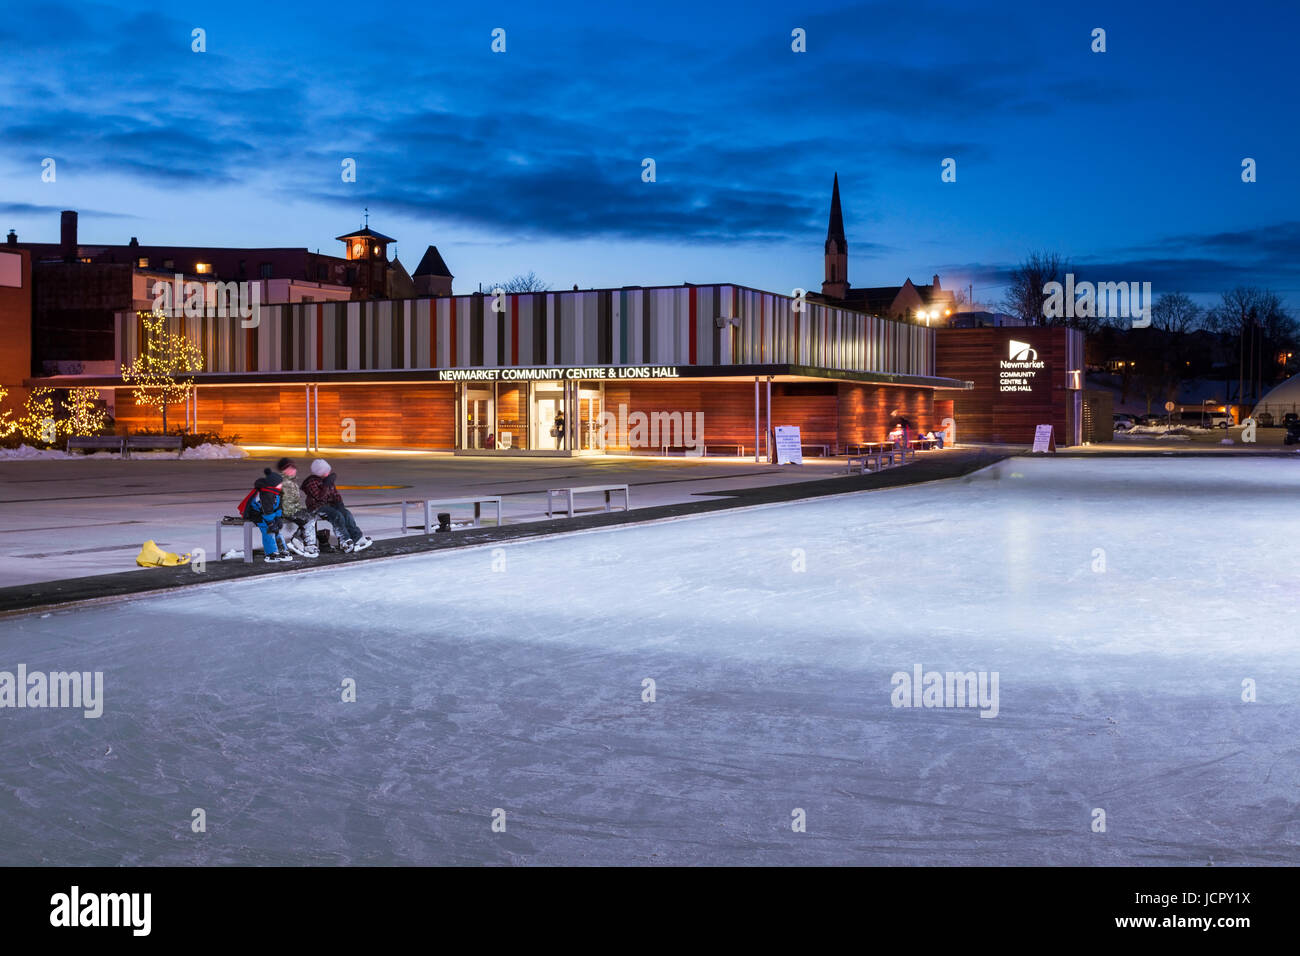 The Newmarket Community Centre in the winter with people, ice skaters in downtown Newmarket, York Region, Ontario, Canada. Stock Photo